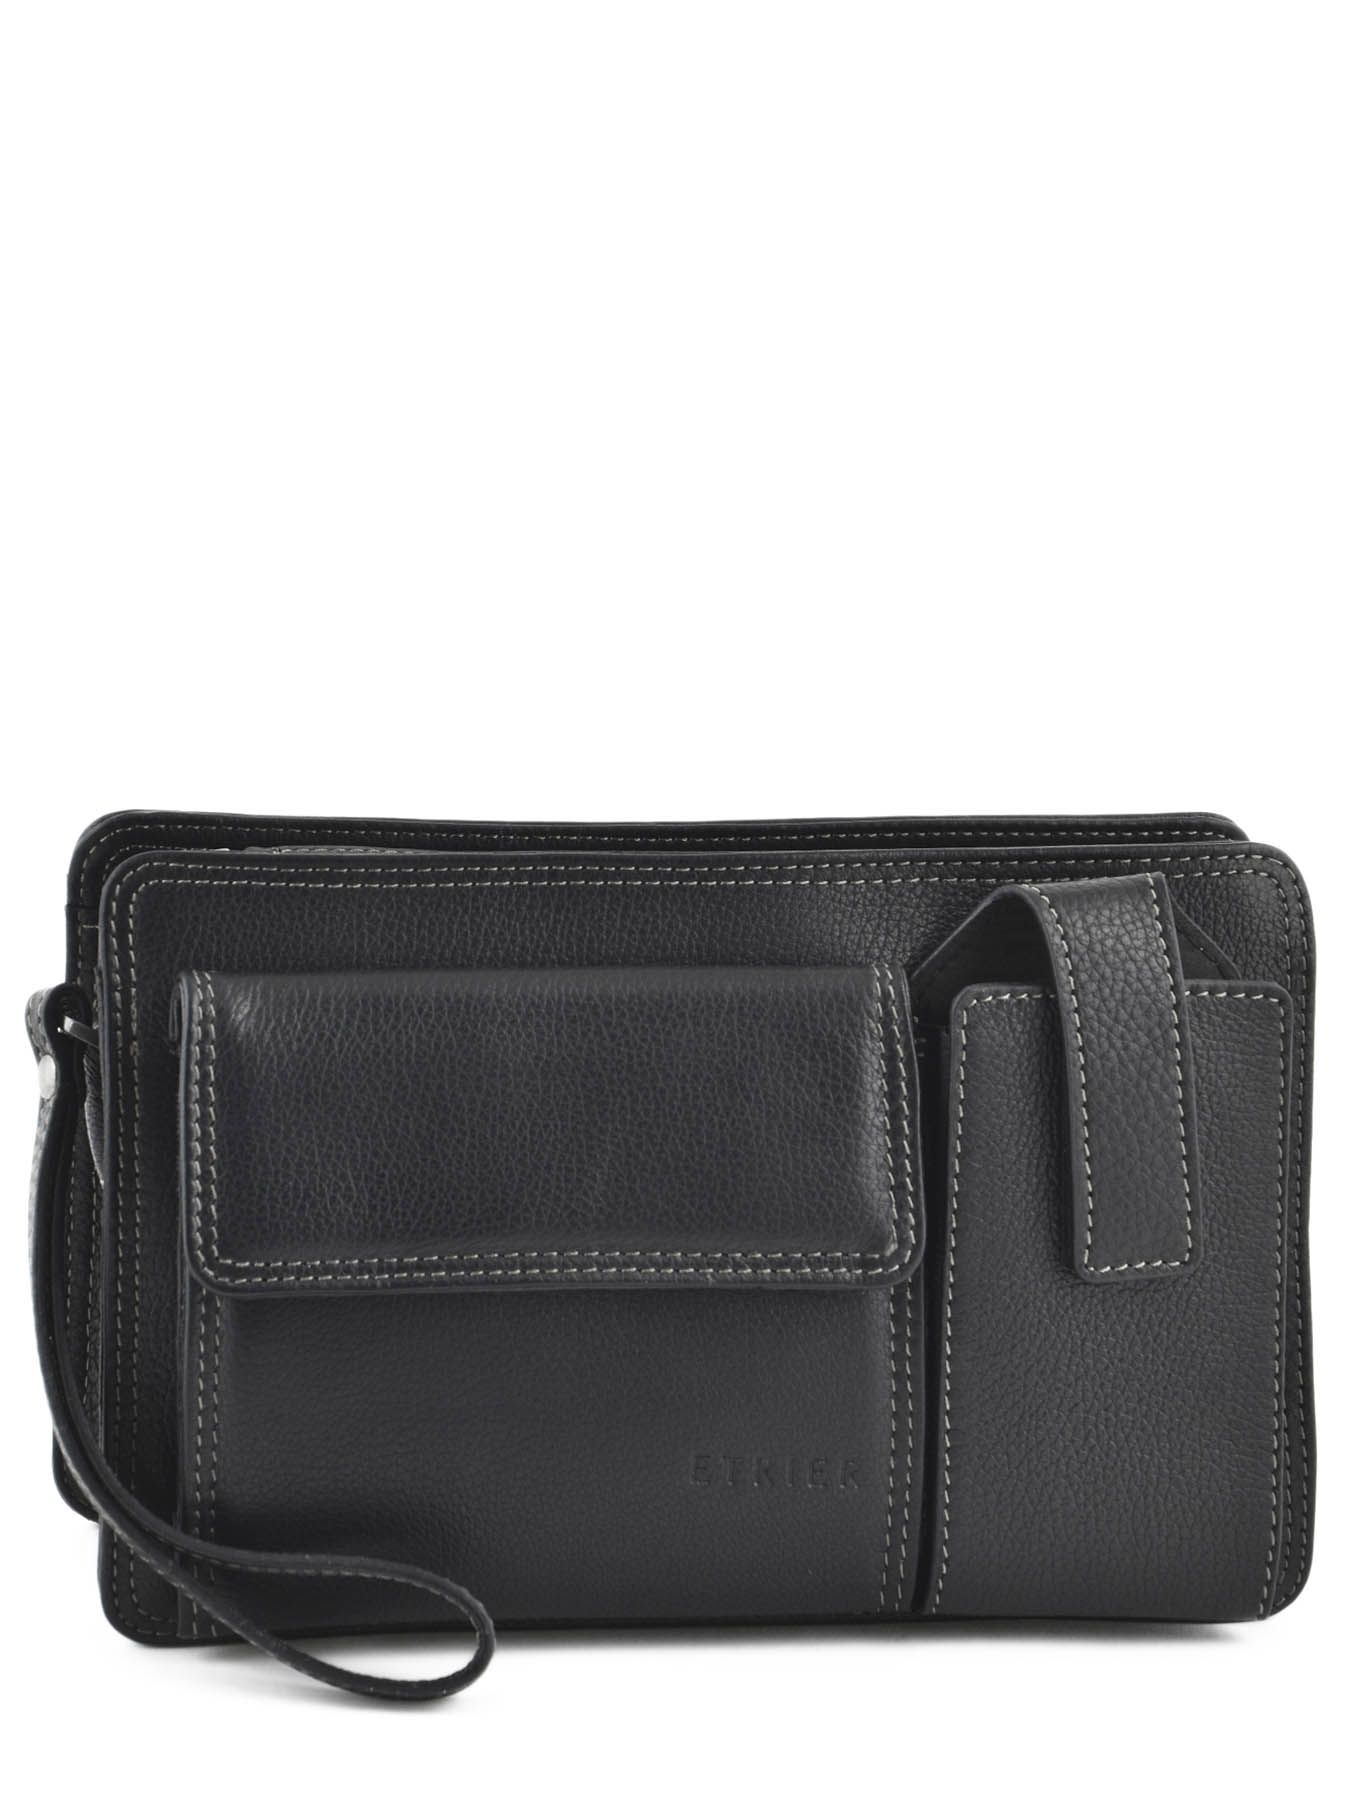 Pochette homme 2 compartiments cuir